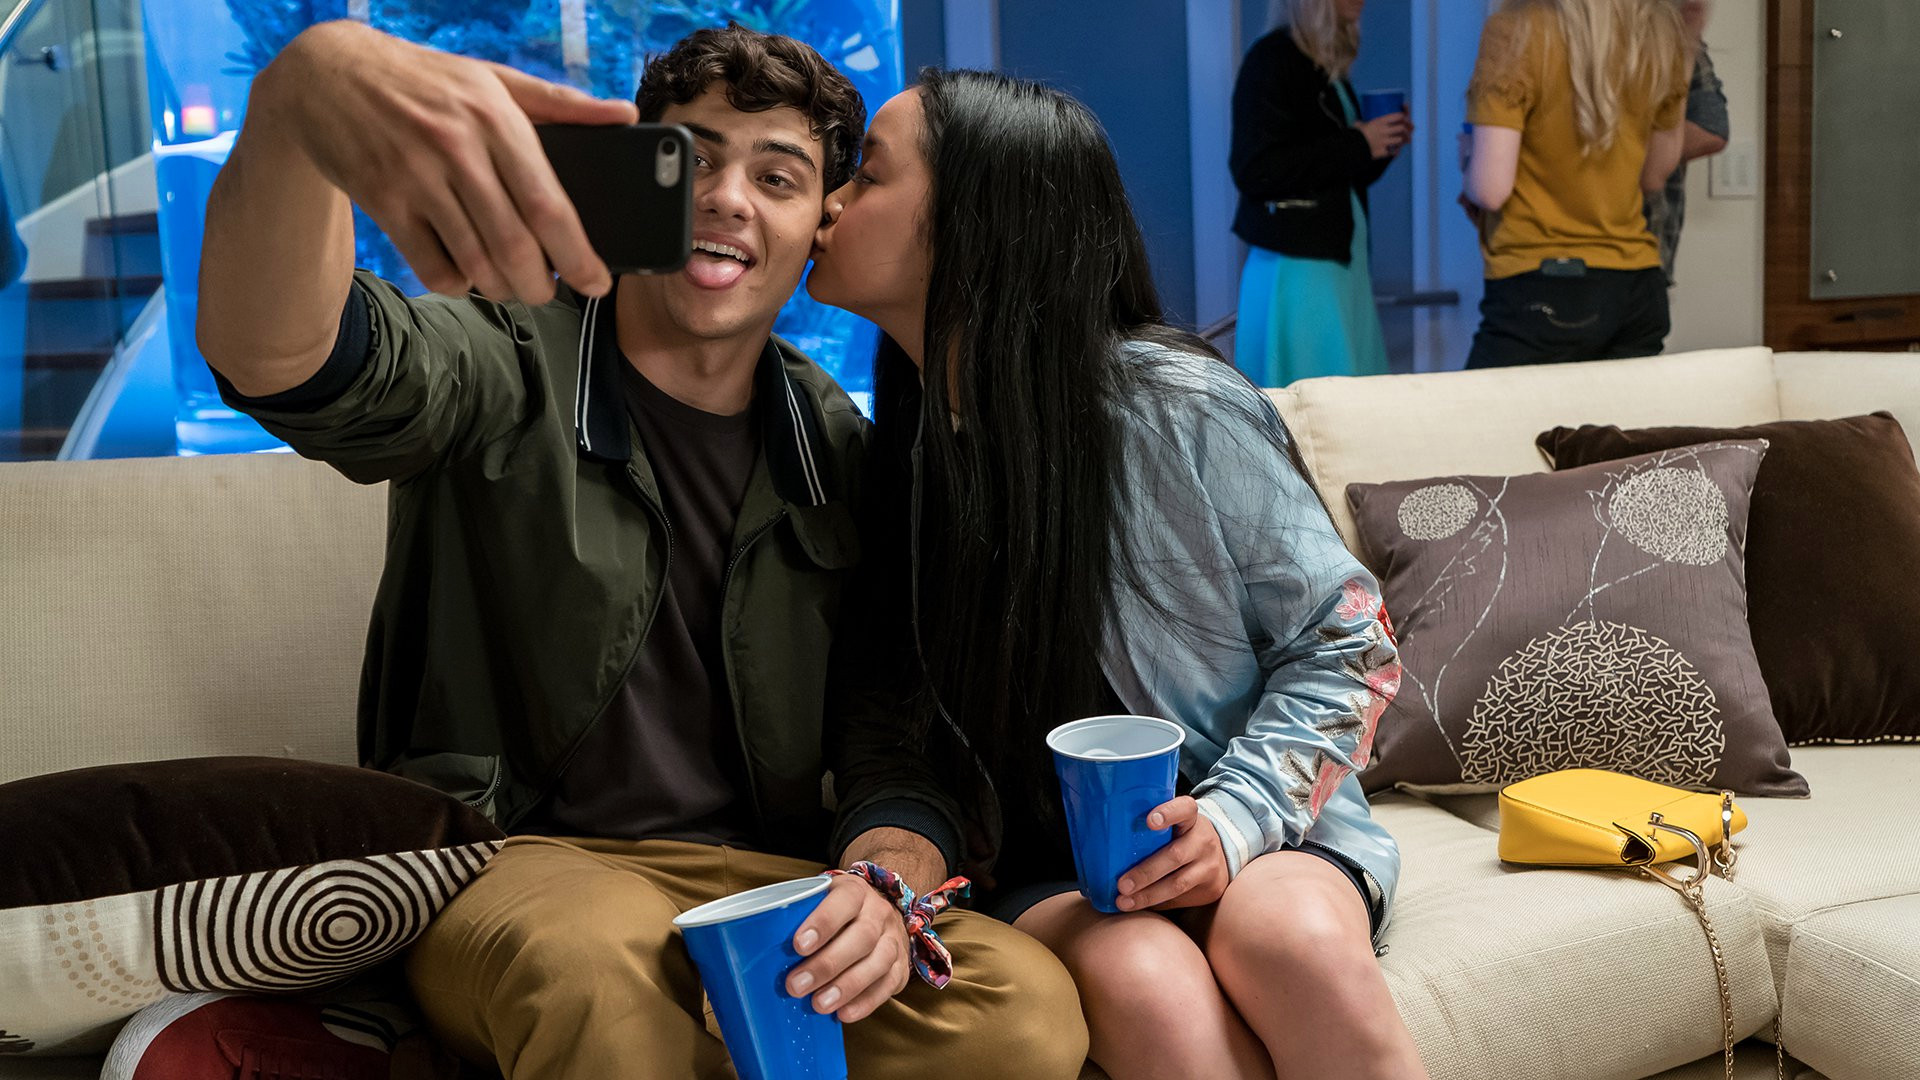 To All The Boys: Always and Forever’s Lana Condor on future of Lara Jean Covey and Peter Kavinsky